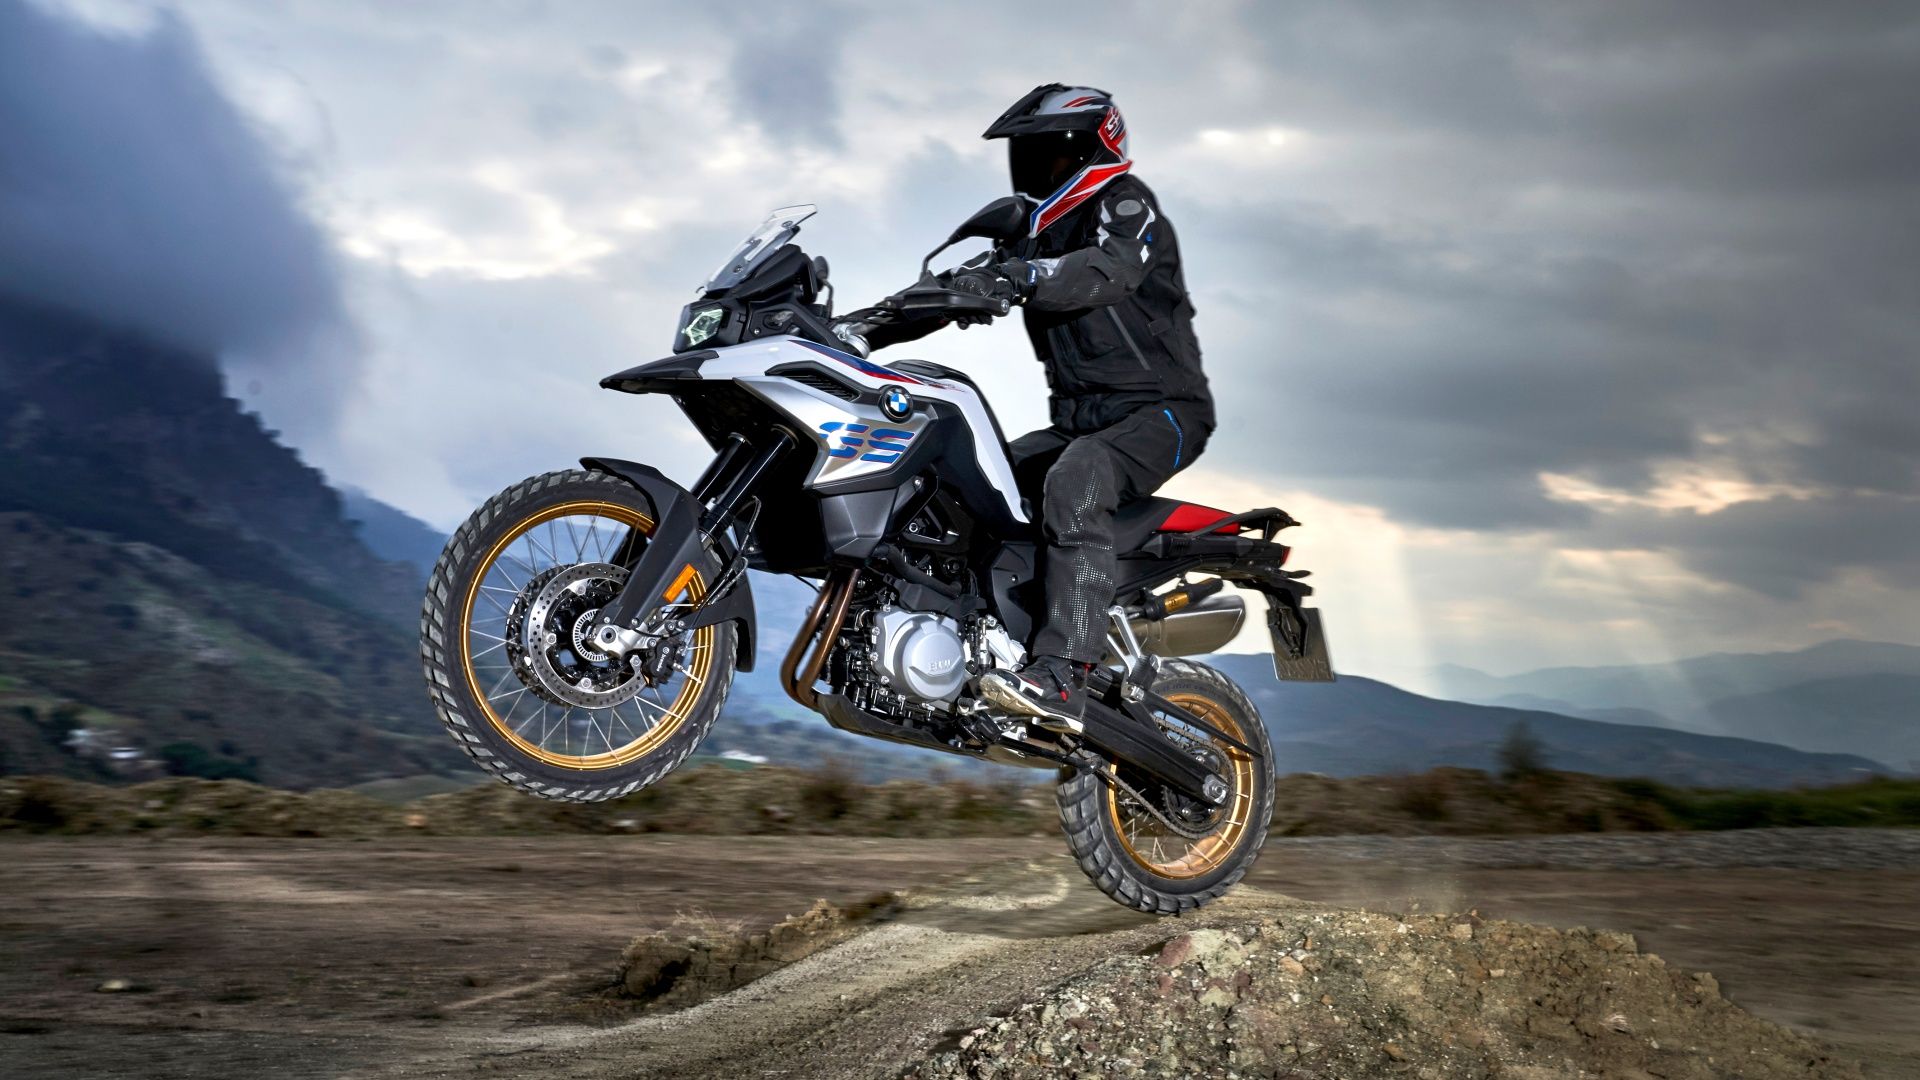 An action shot of a BMW F 850 GS off-road